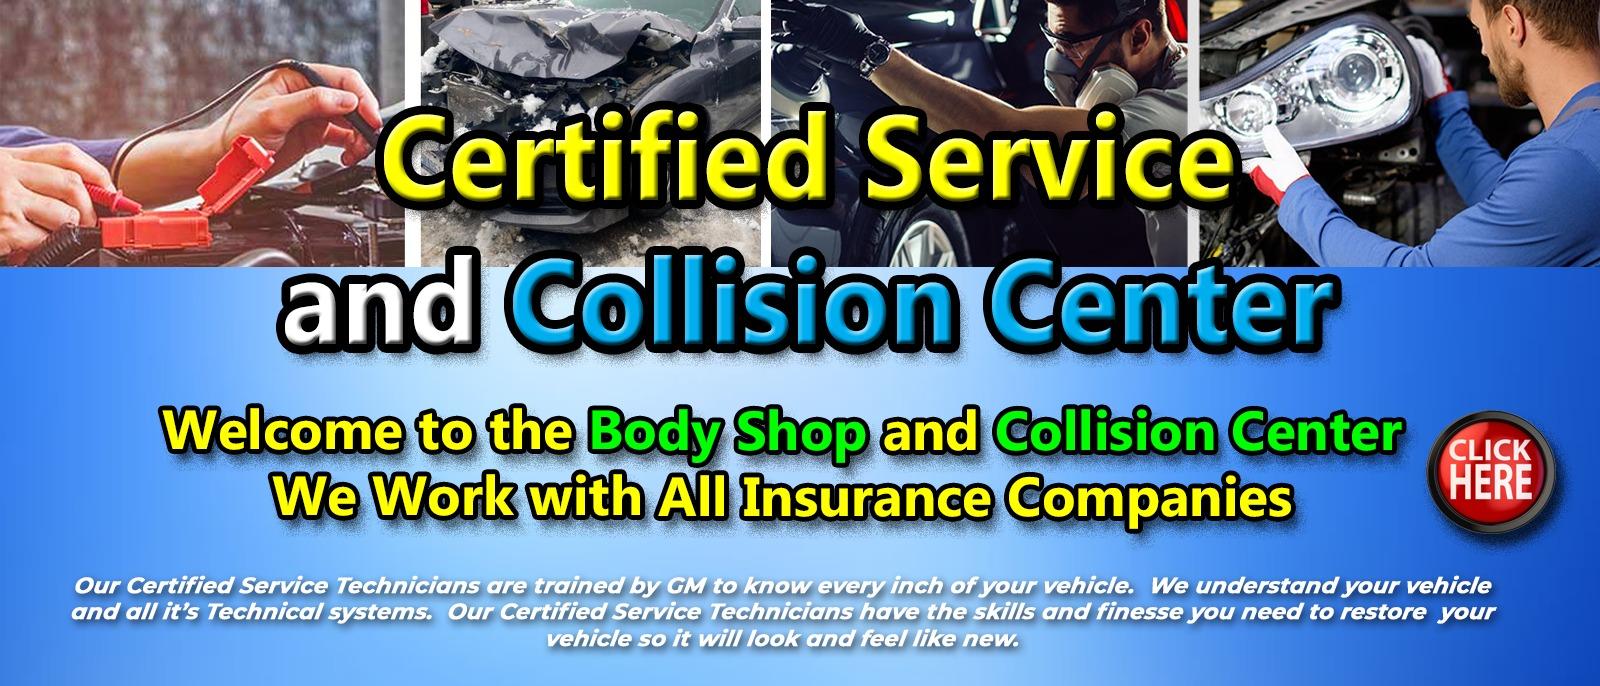 Collision Center May 2021